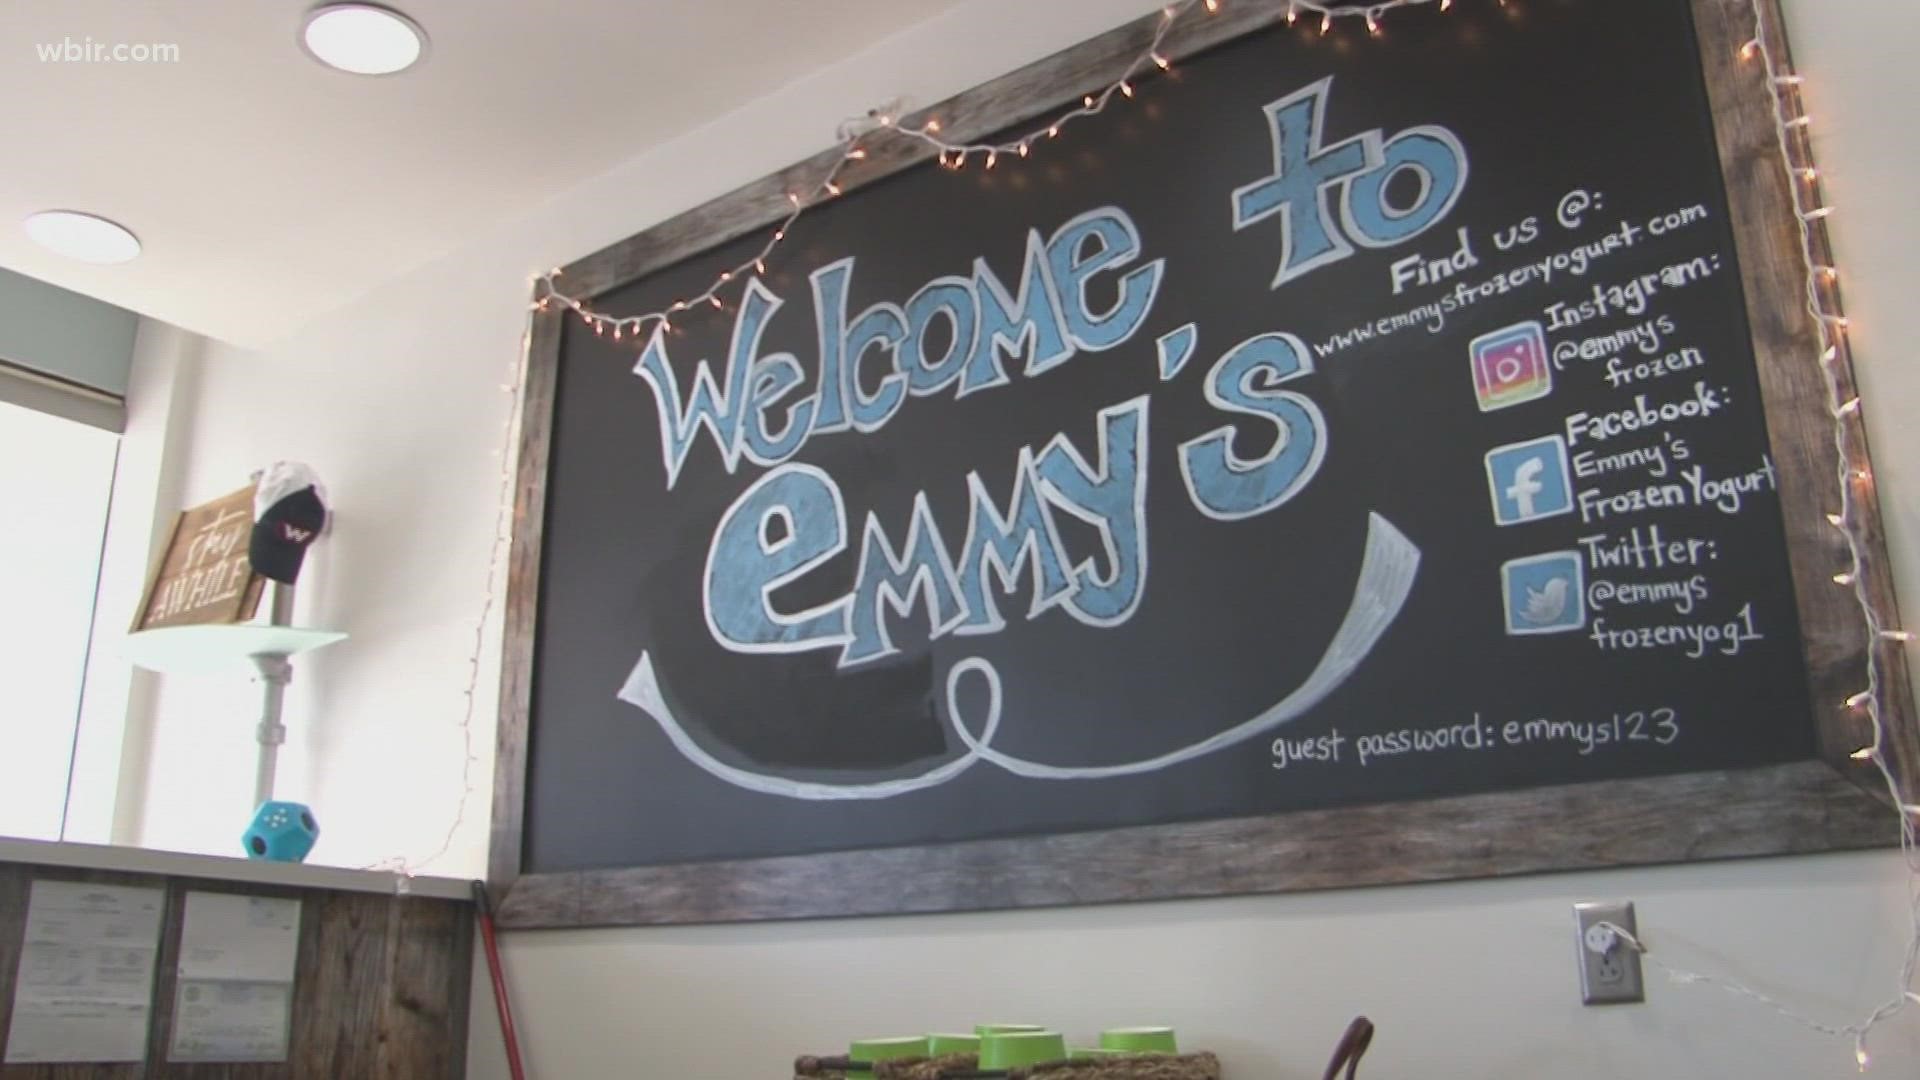 For two and a half years Emmy's Frozen Yogurt Shop in Knoxville greeted customers with smiles and positivity.